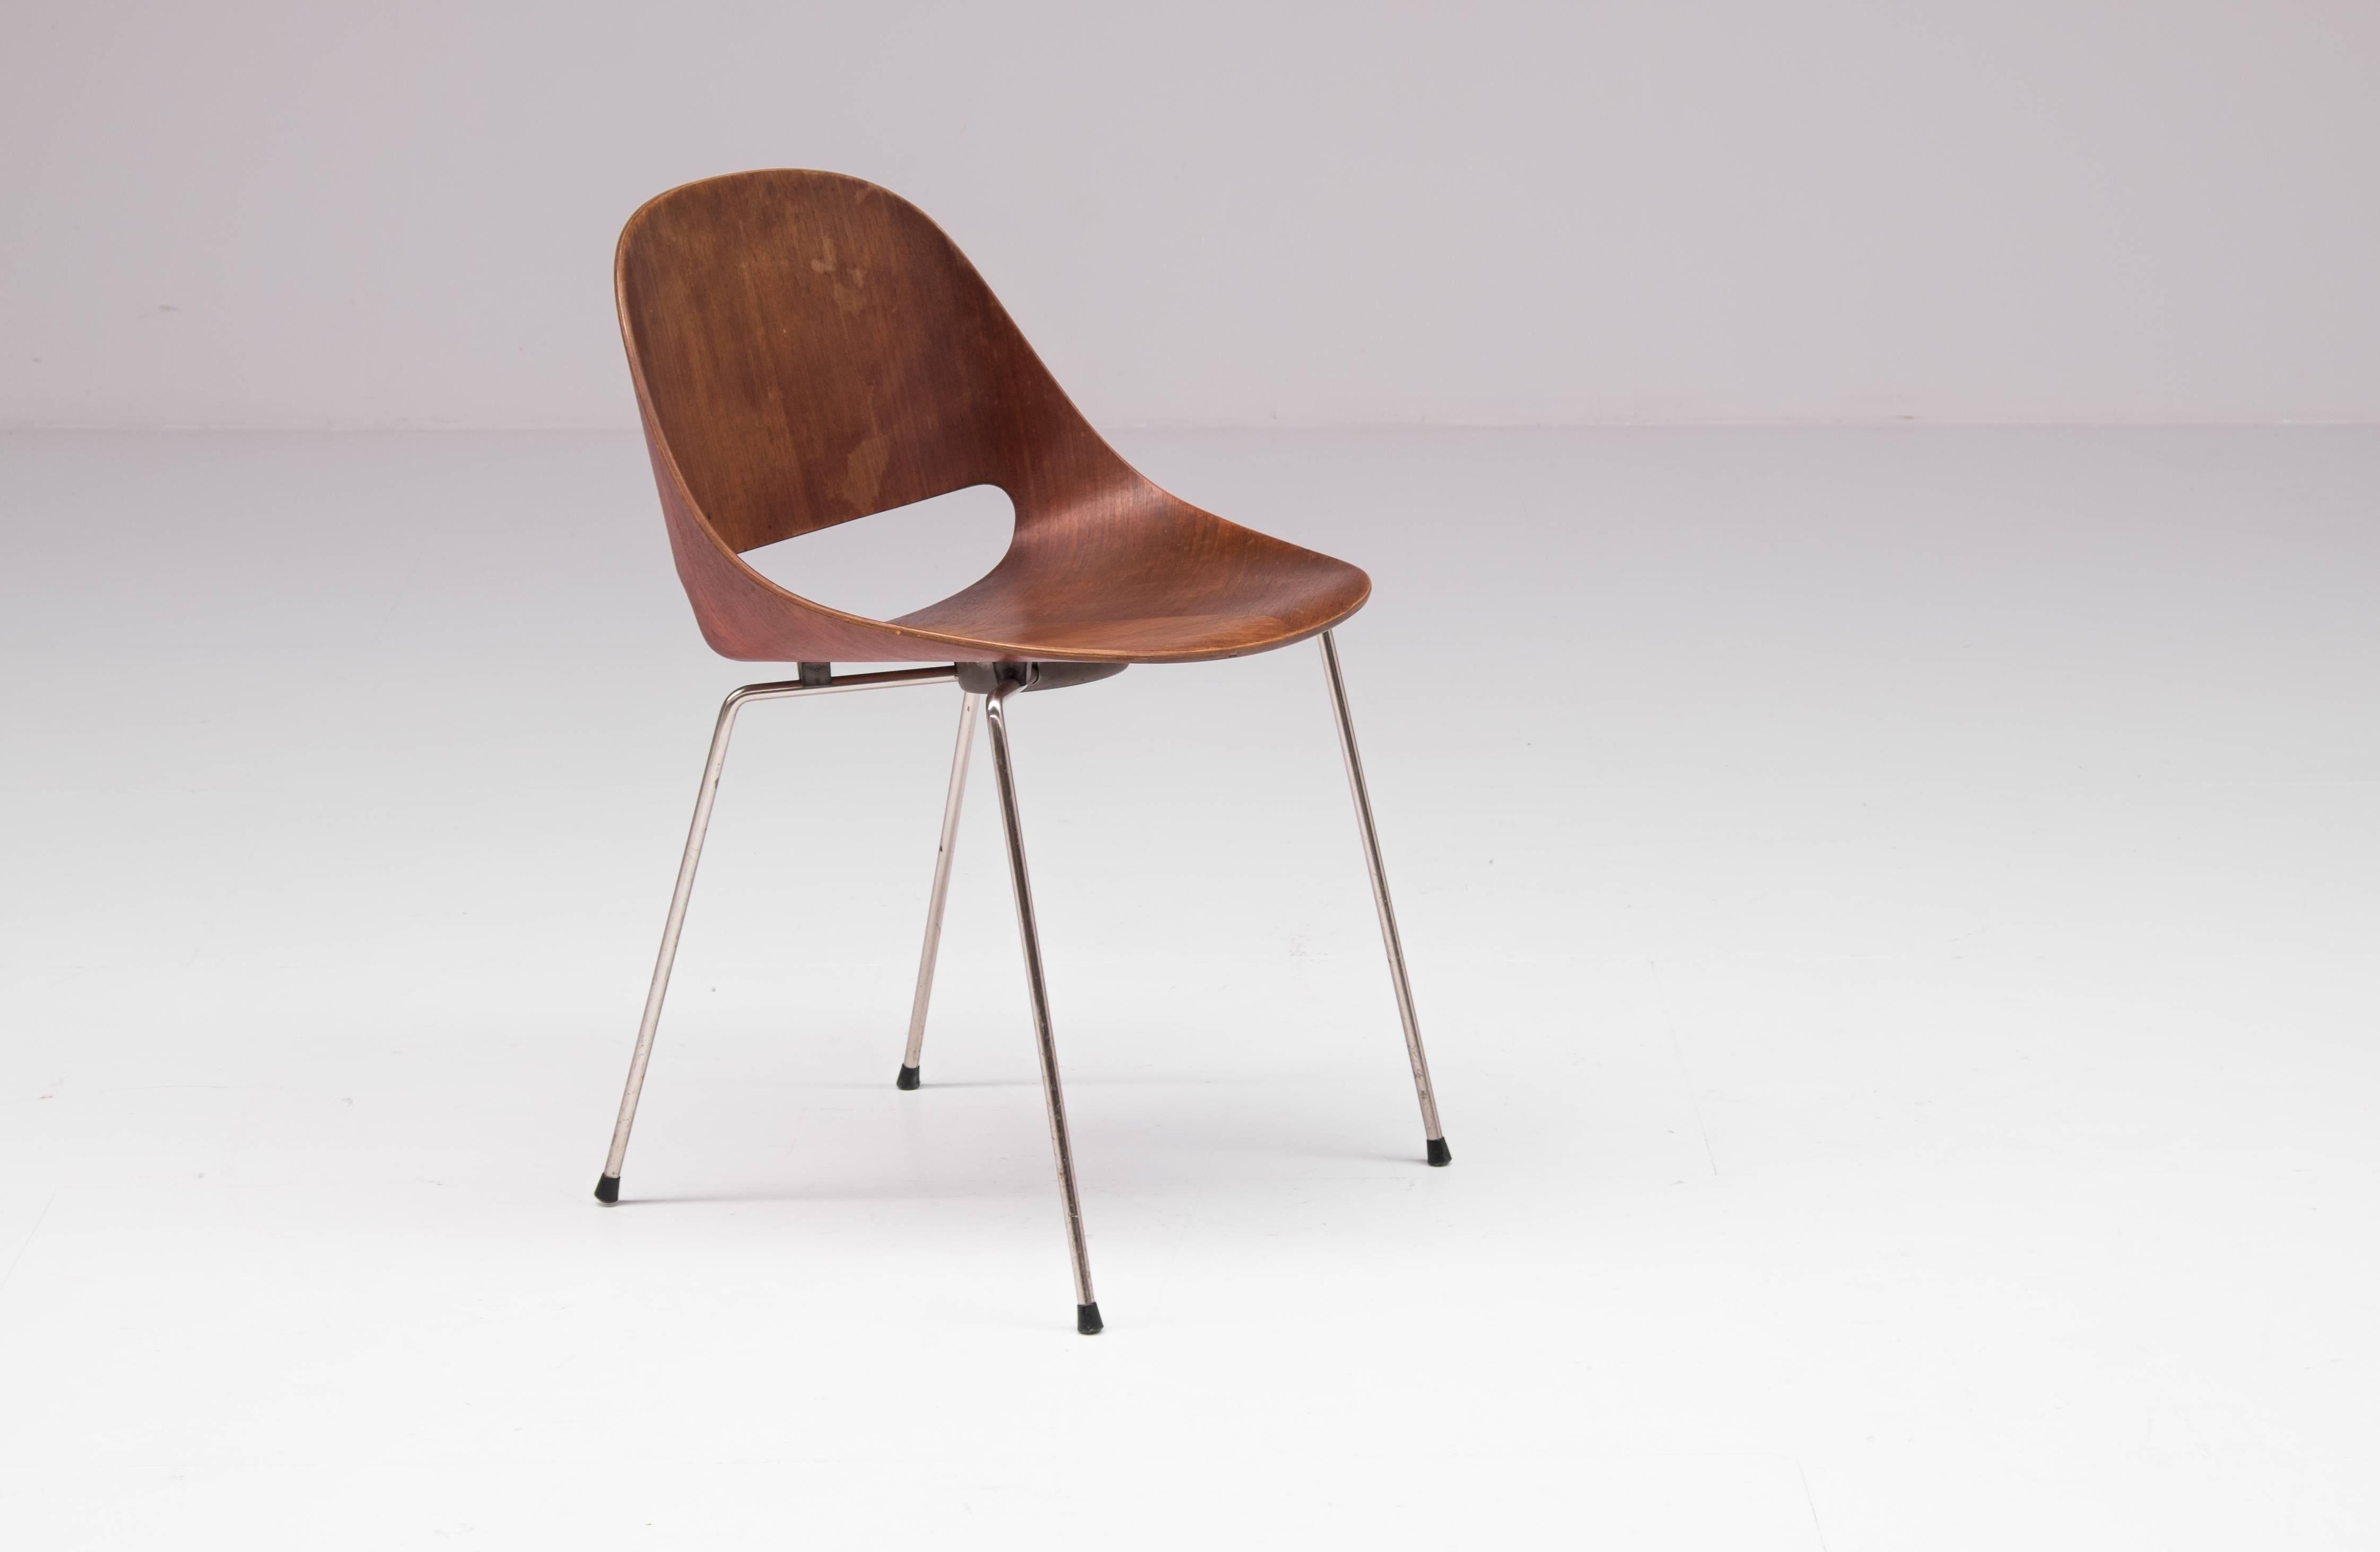 Rare SL58 chair by Belgian architect and designer Léon Stynen, 1950s.

Plywood shell seat which remains in very good condition, steel frame with four original shockmounts. 

Designed for the Expo 58 world exhibition in Brussels, 1958.